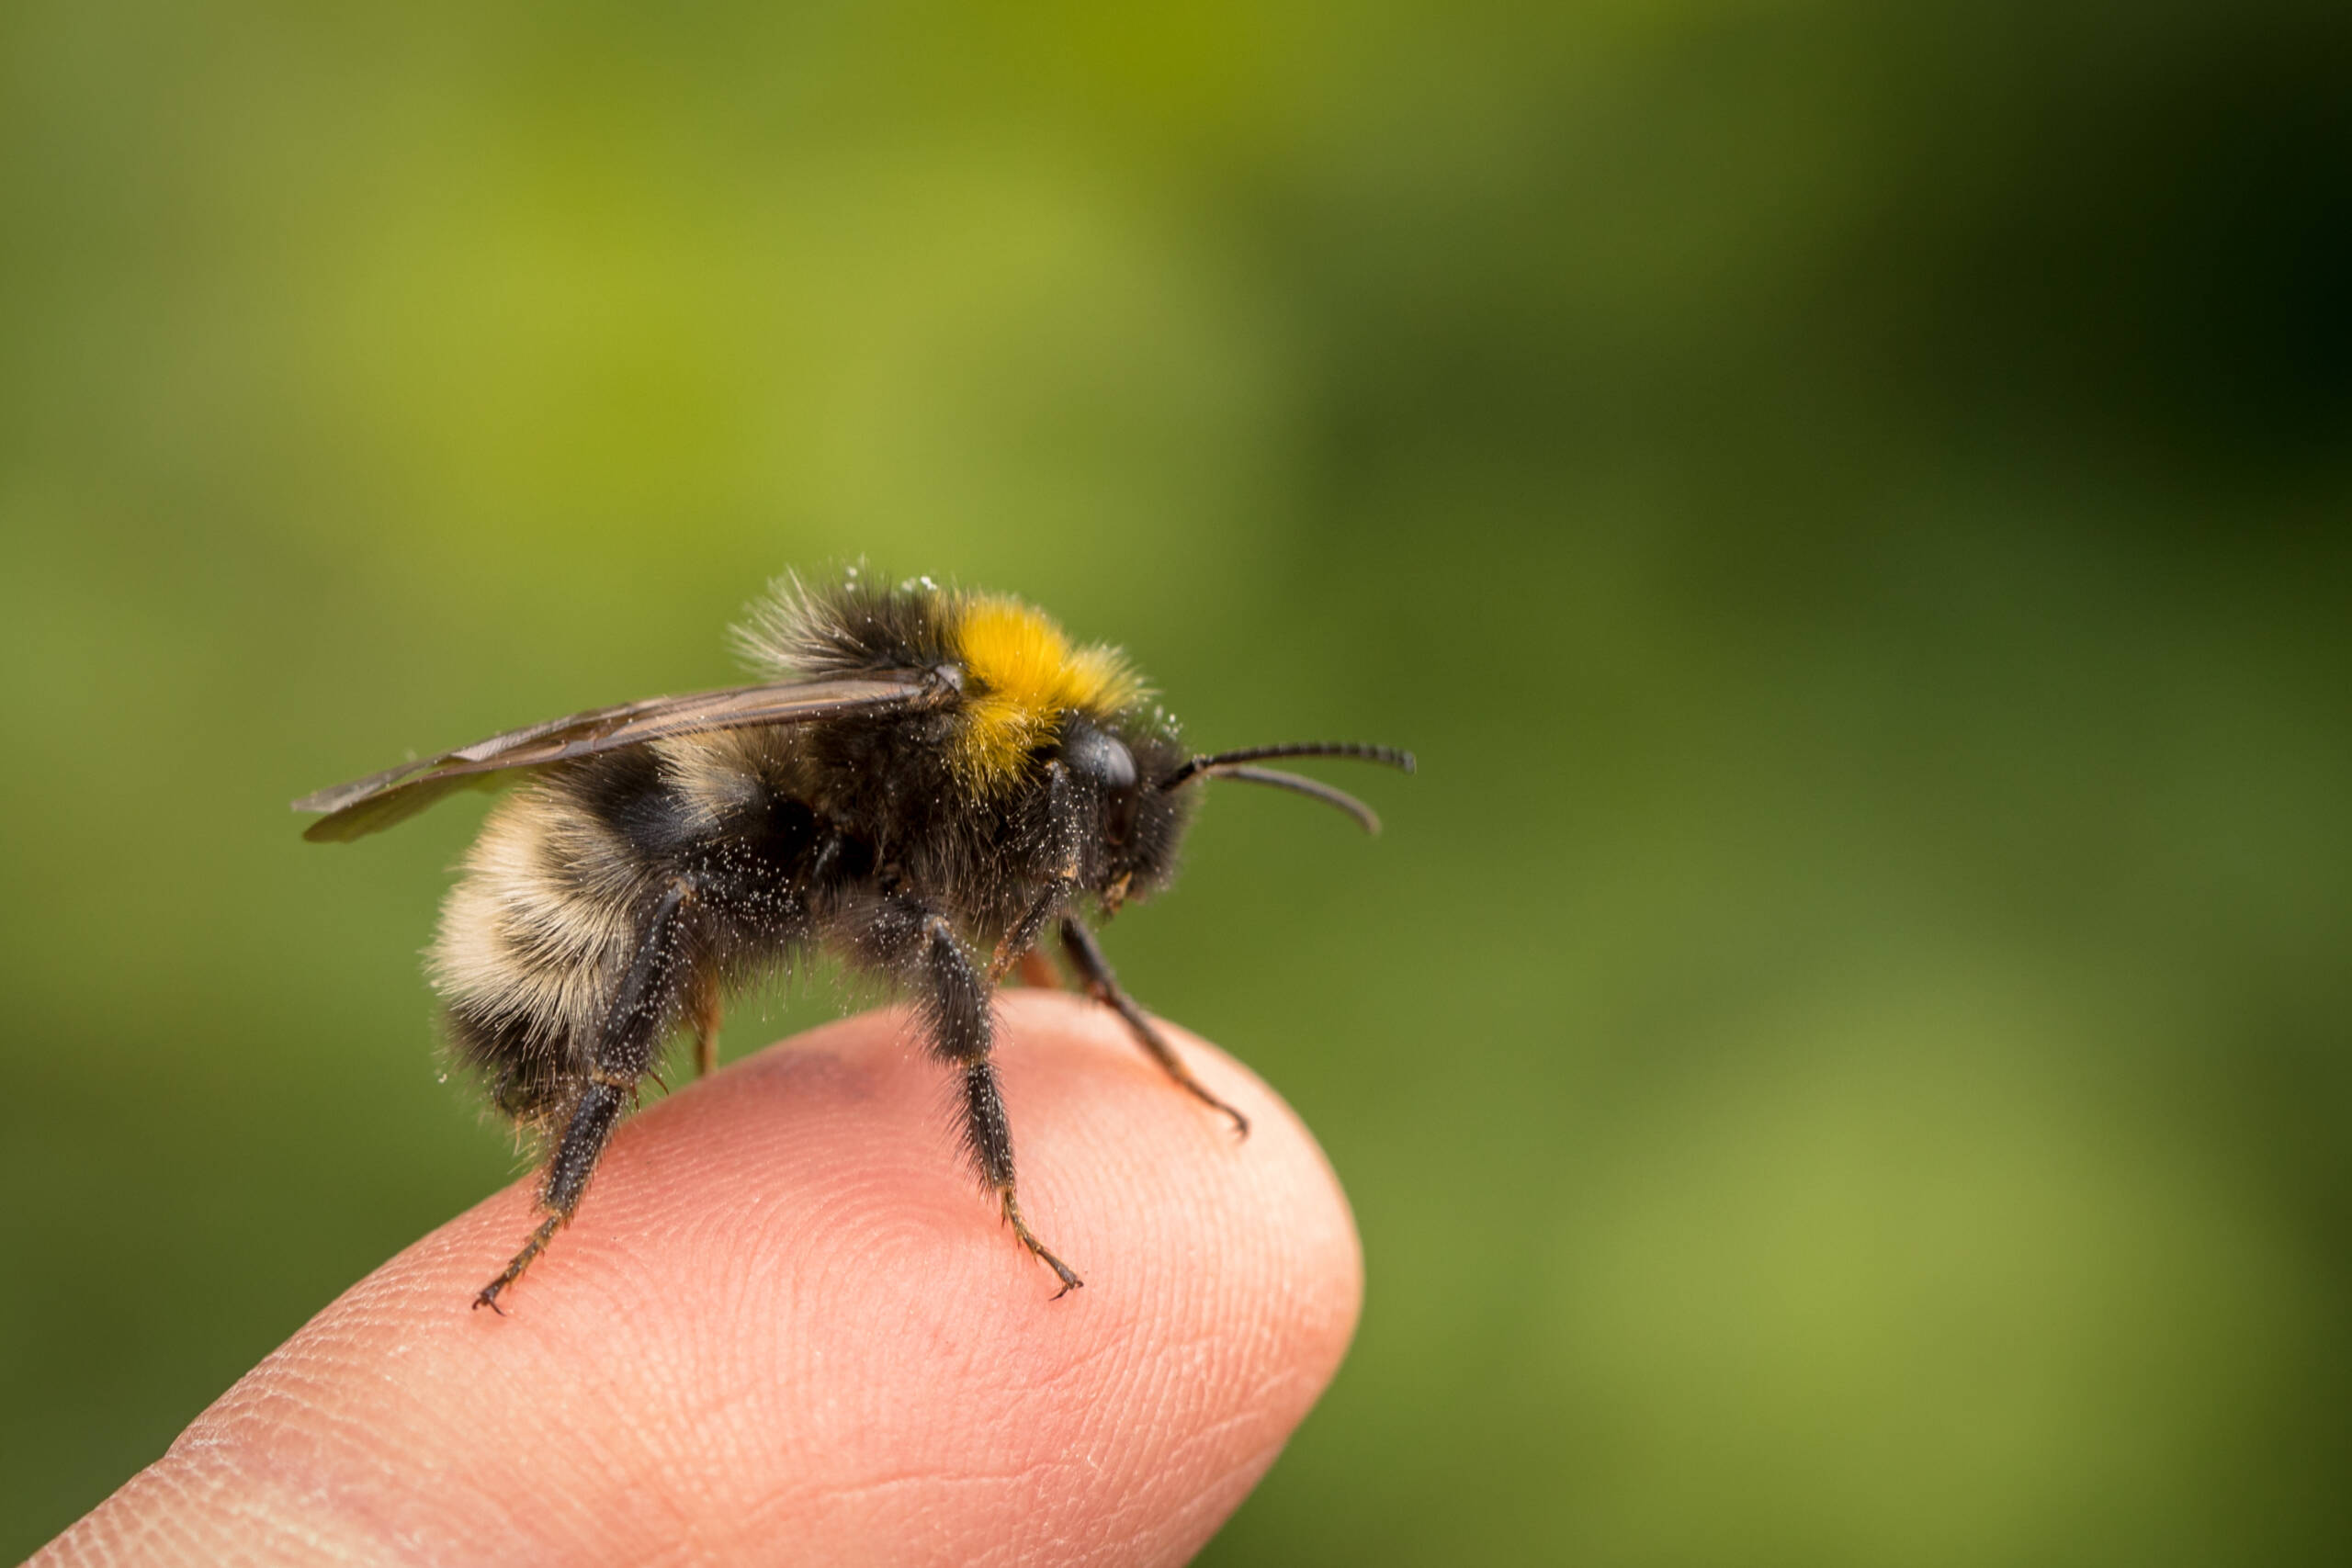 Bombus norvegicus, a species of cuckoo bumblebee, male insect sitting on a human finger